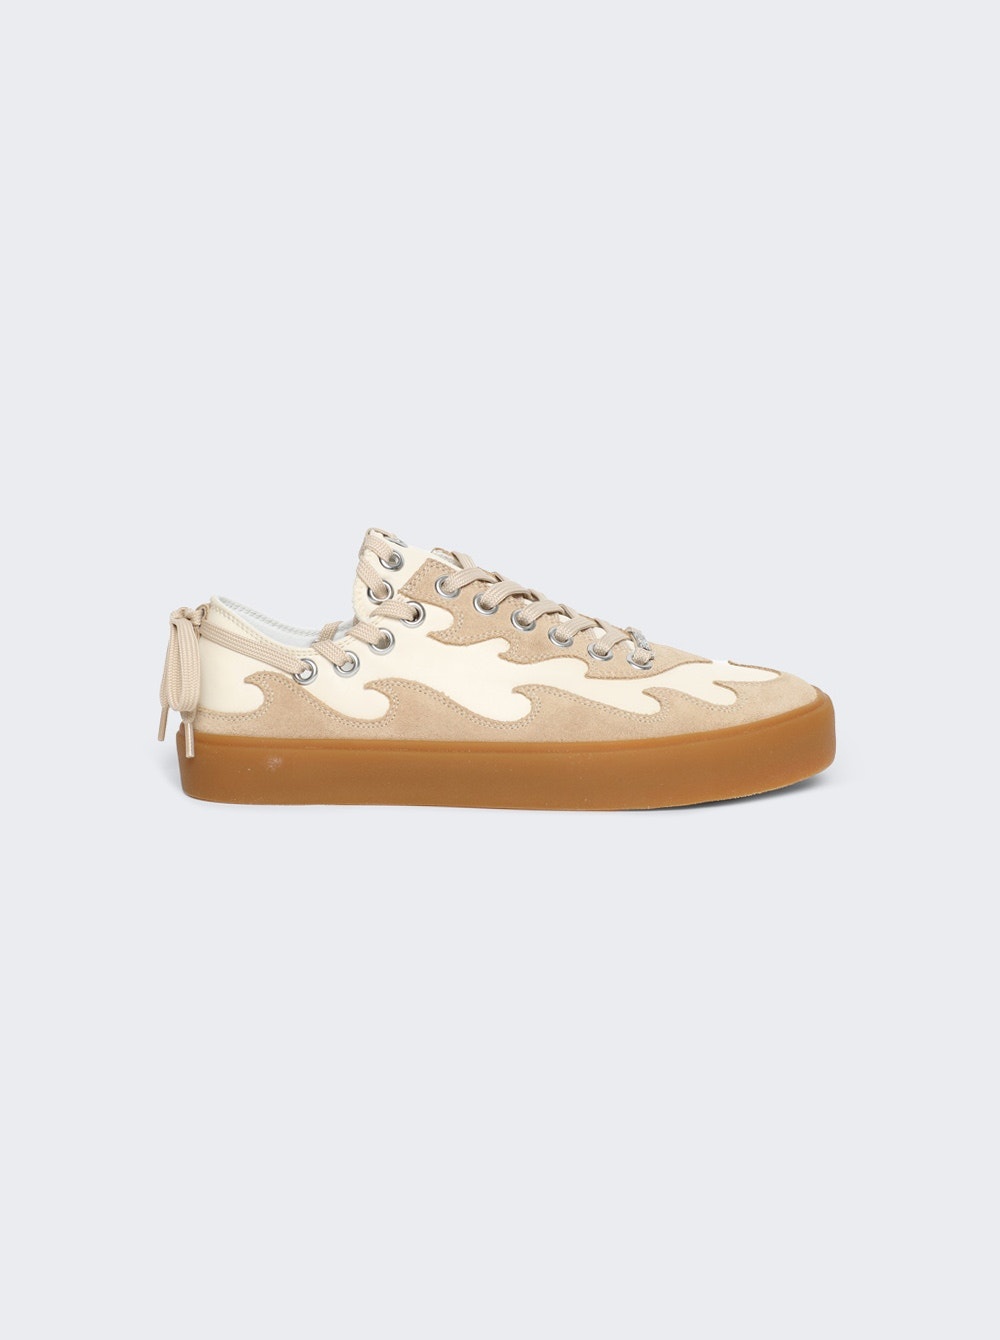 Kellys Suede Sneakers Beige and Off-White - 1